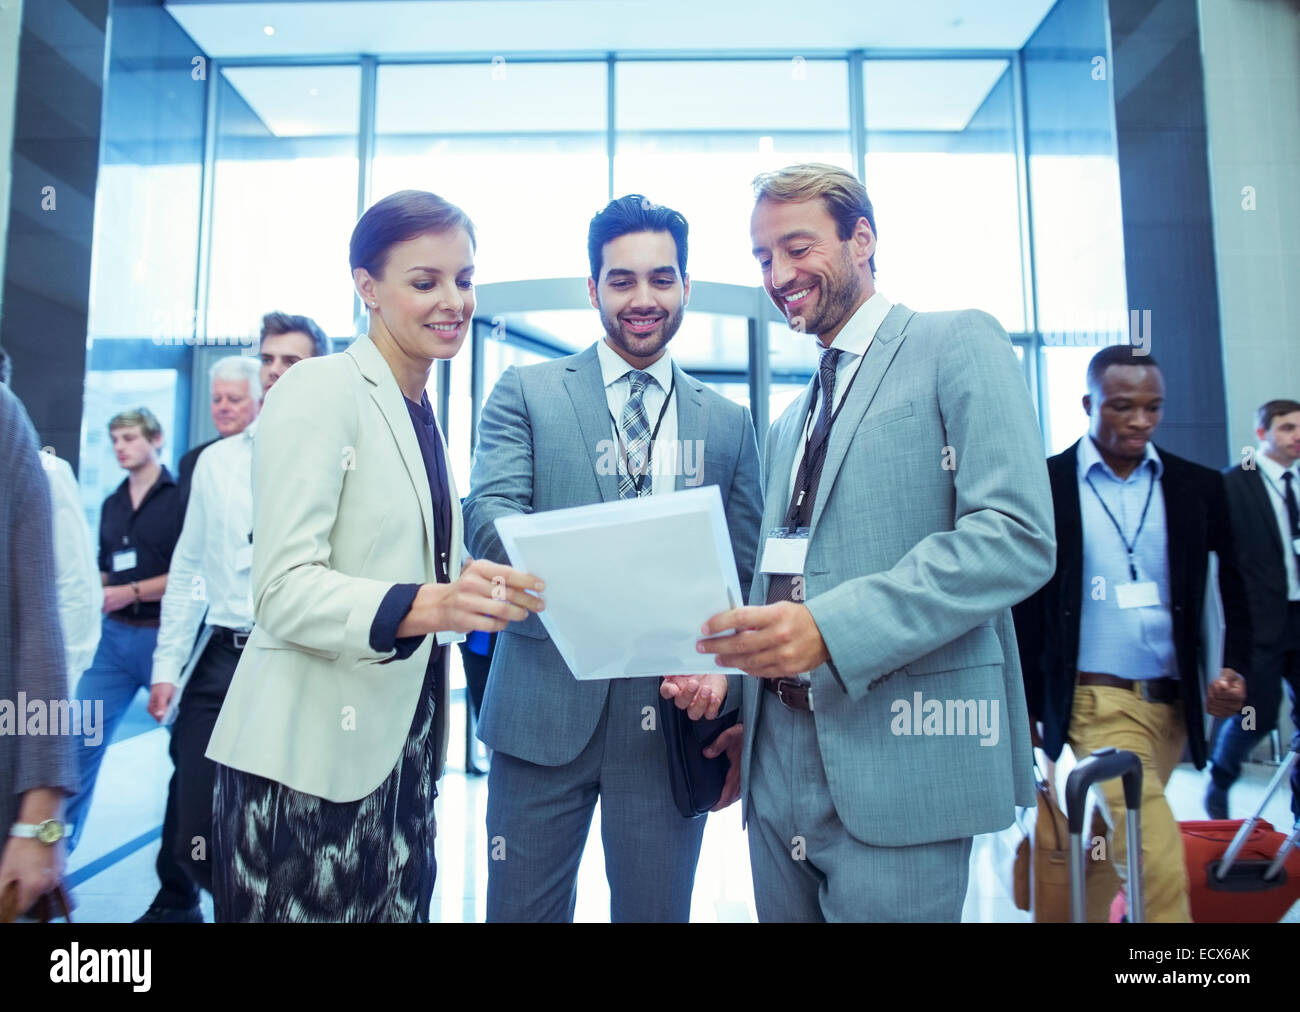 Portrait of businesswoman and two businessmen standing in lobby of conference center Stock Photo